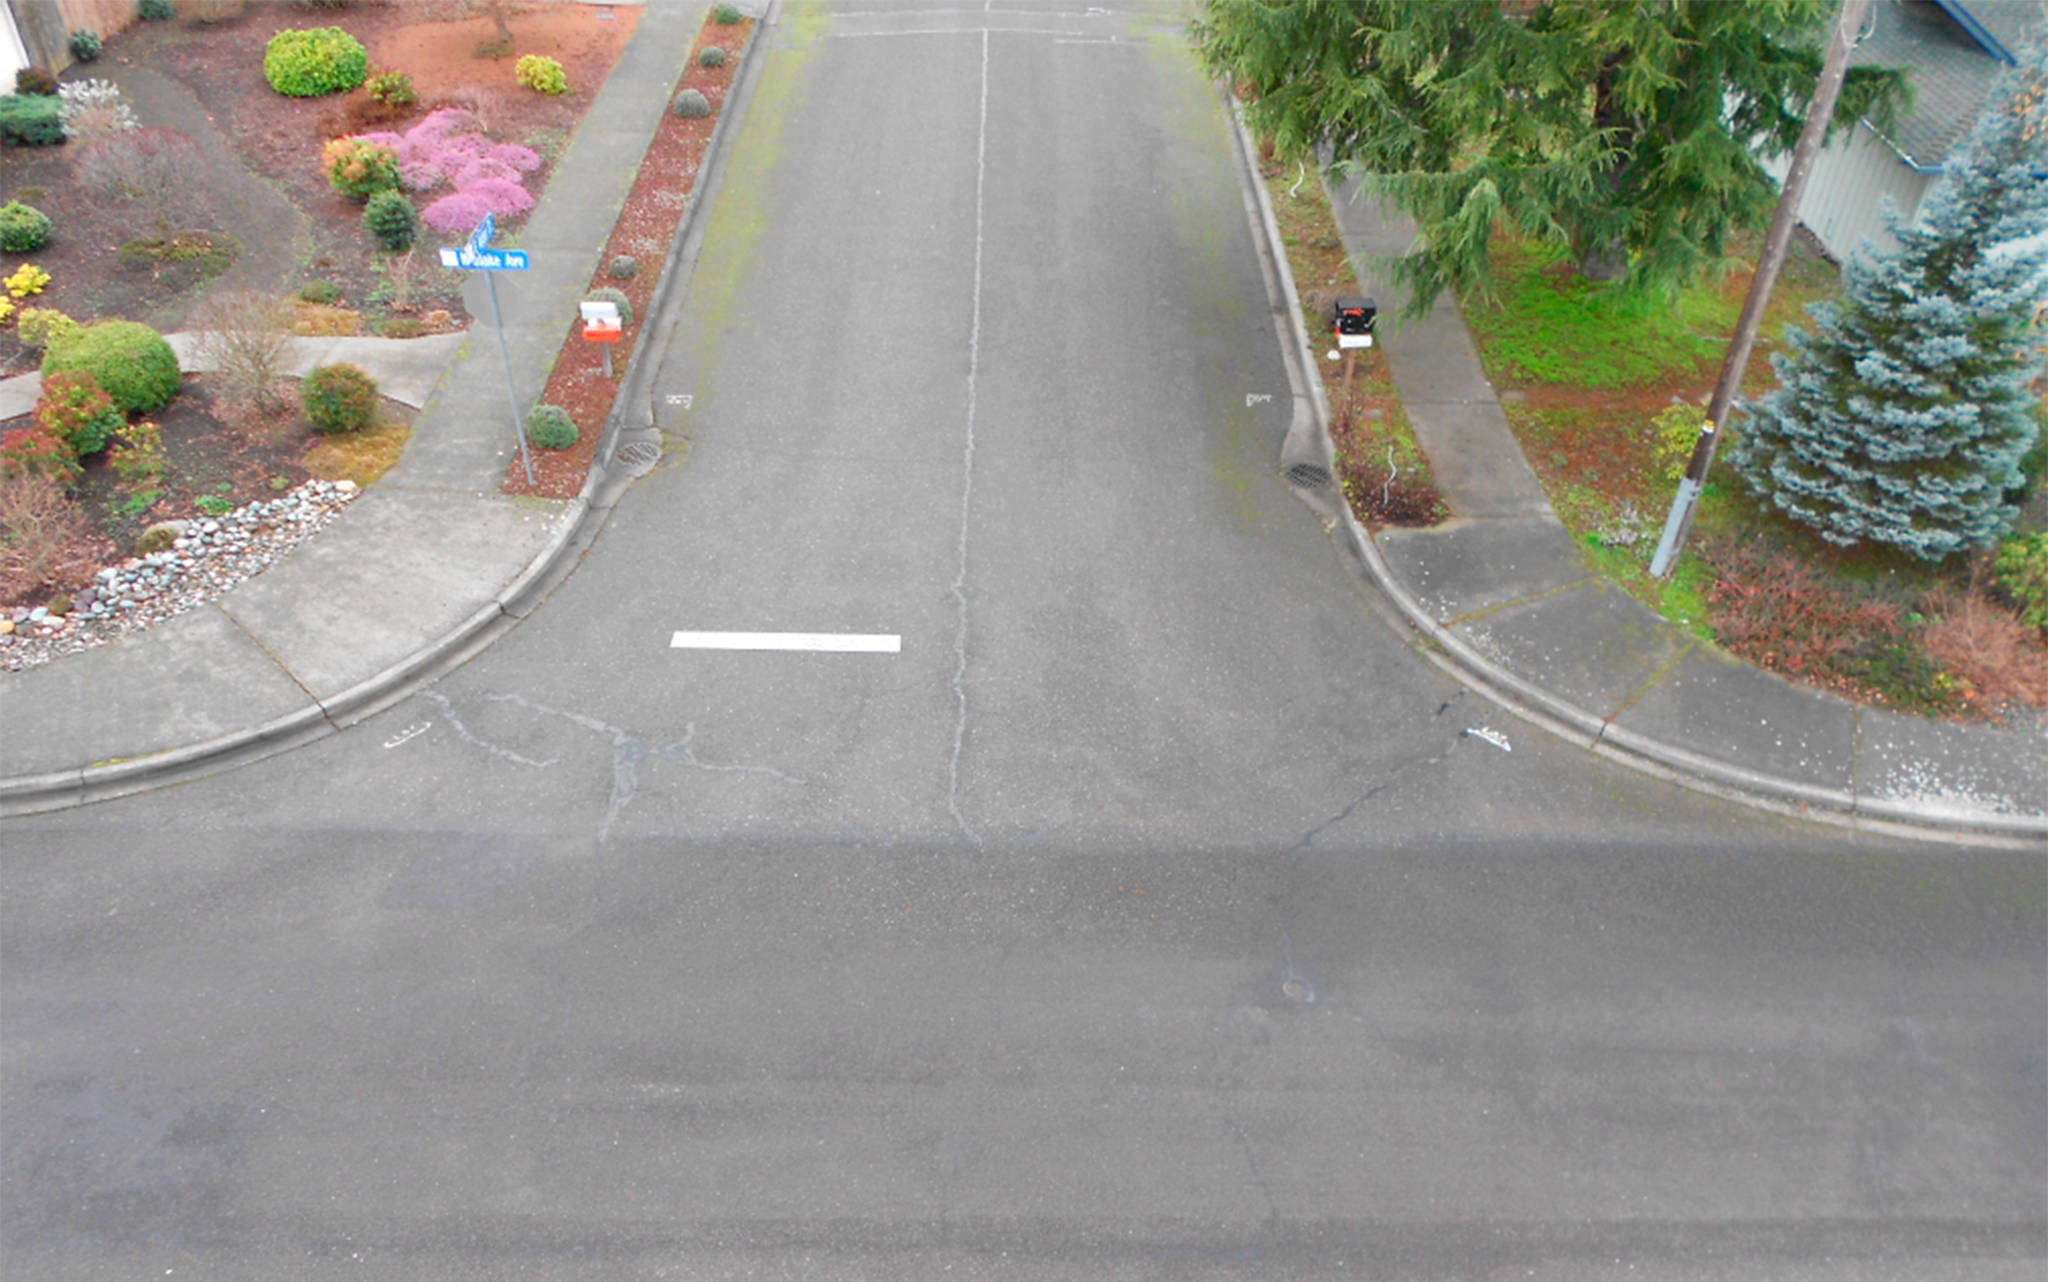 Once curbs are repaired along North Blake Avenue, new crosswalks will be painted and signs installed by Carrie Blake Community Park. (City of Sequim)